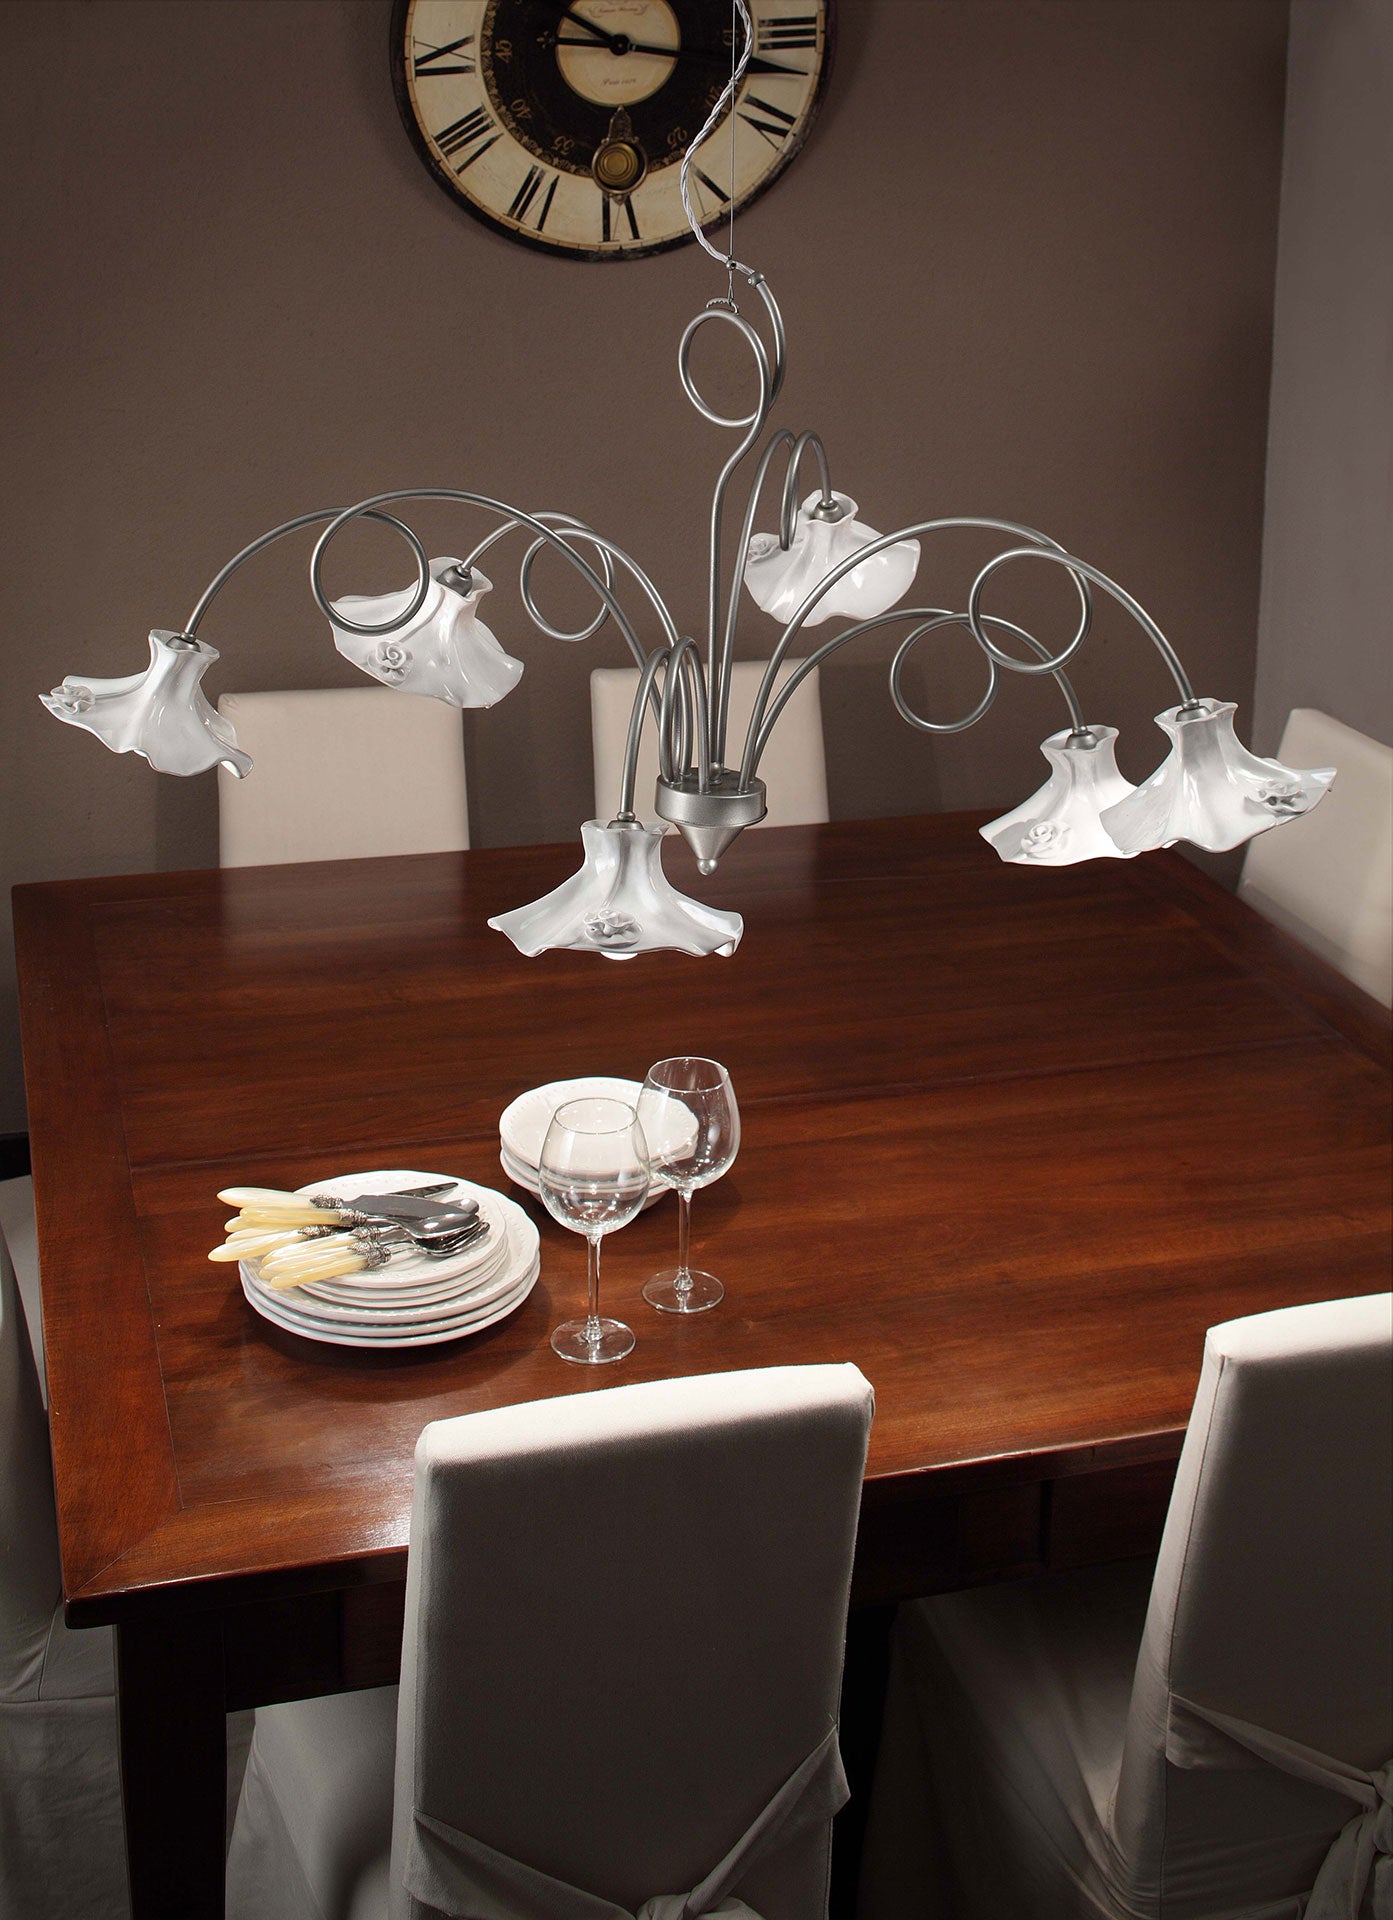 LECCO C1295 - Chandelier